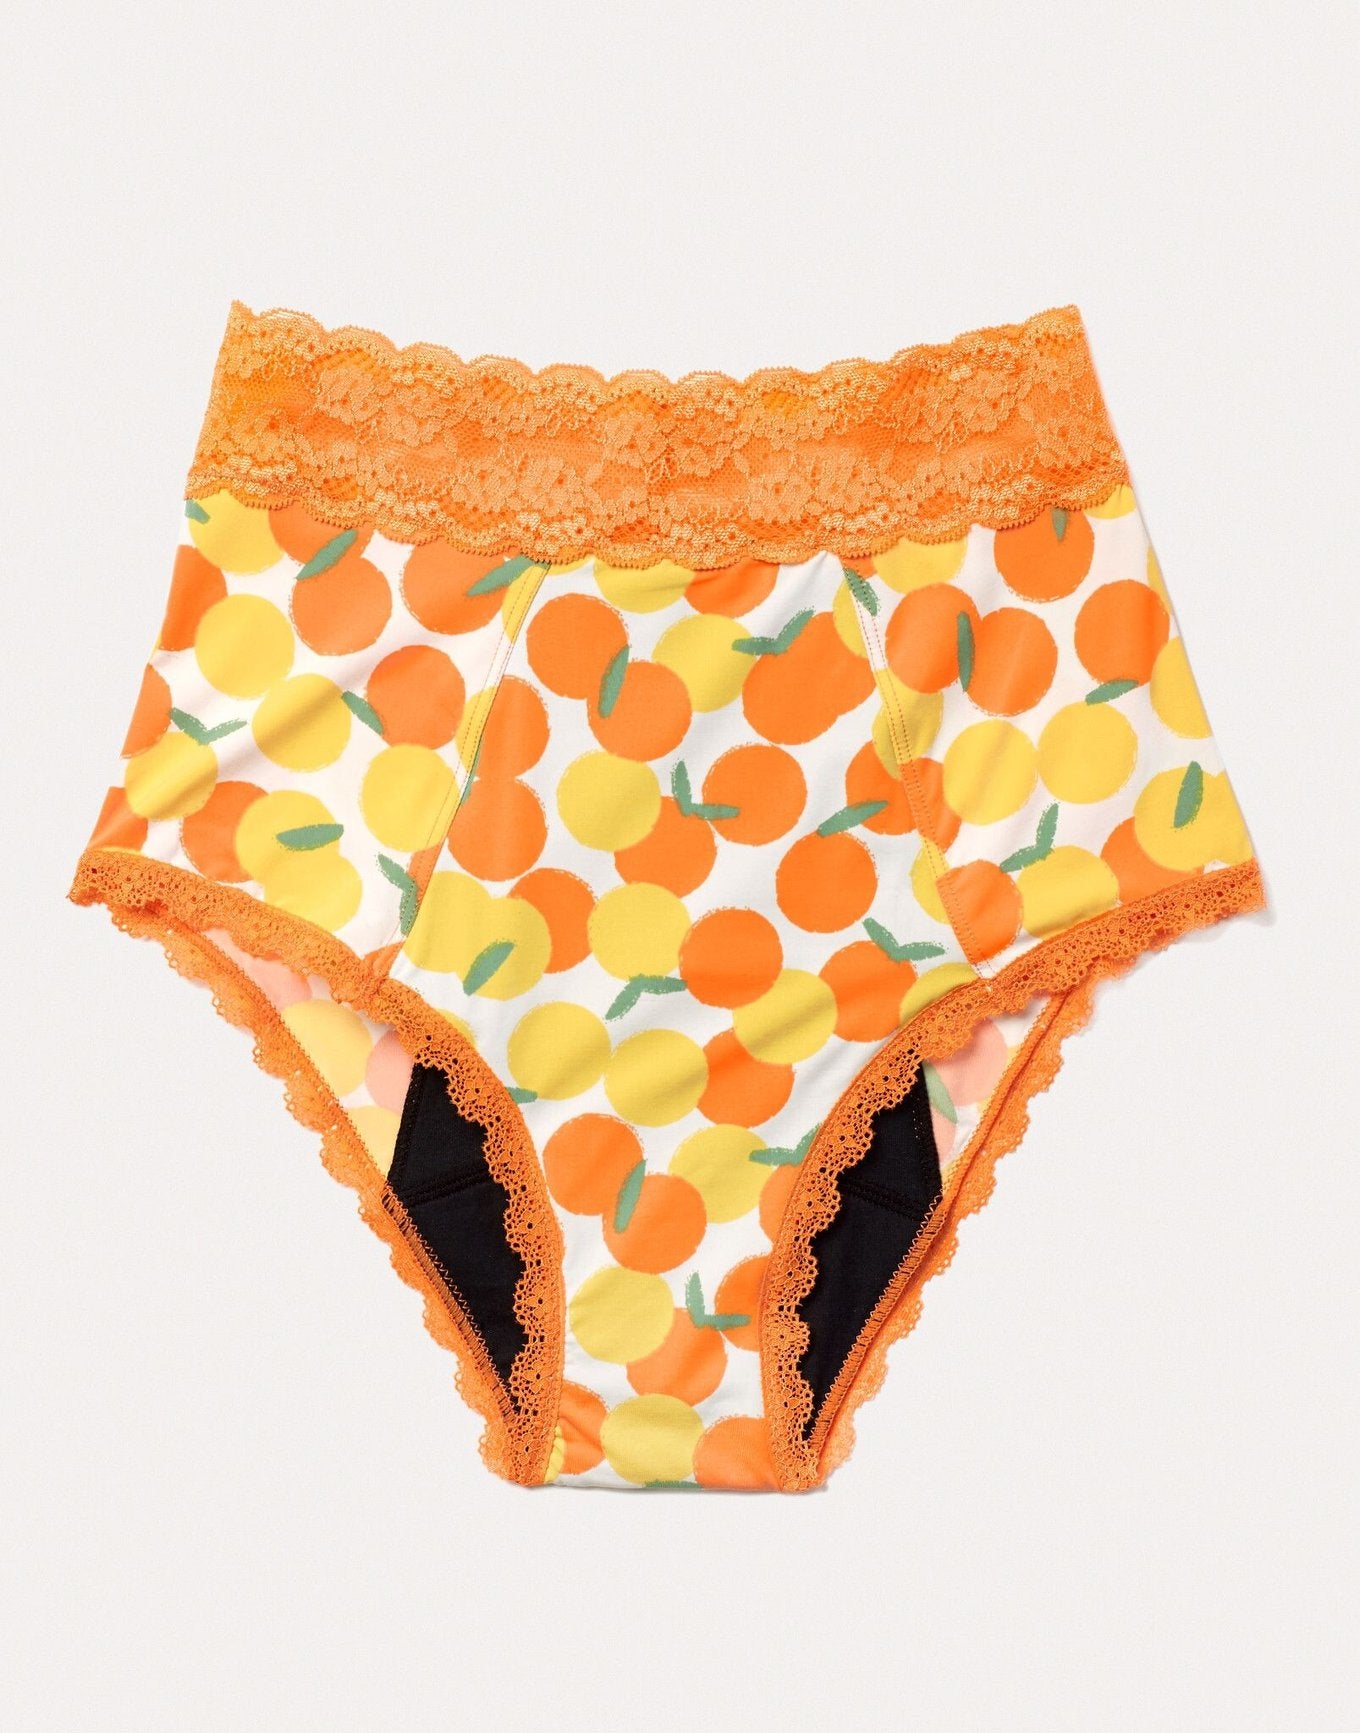 Joyja Amelia period-proof panty in color Zest of Life and shape high waisted